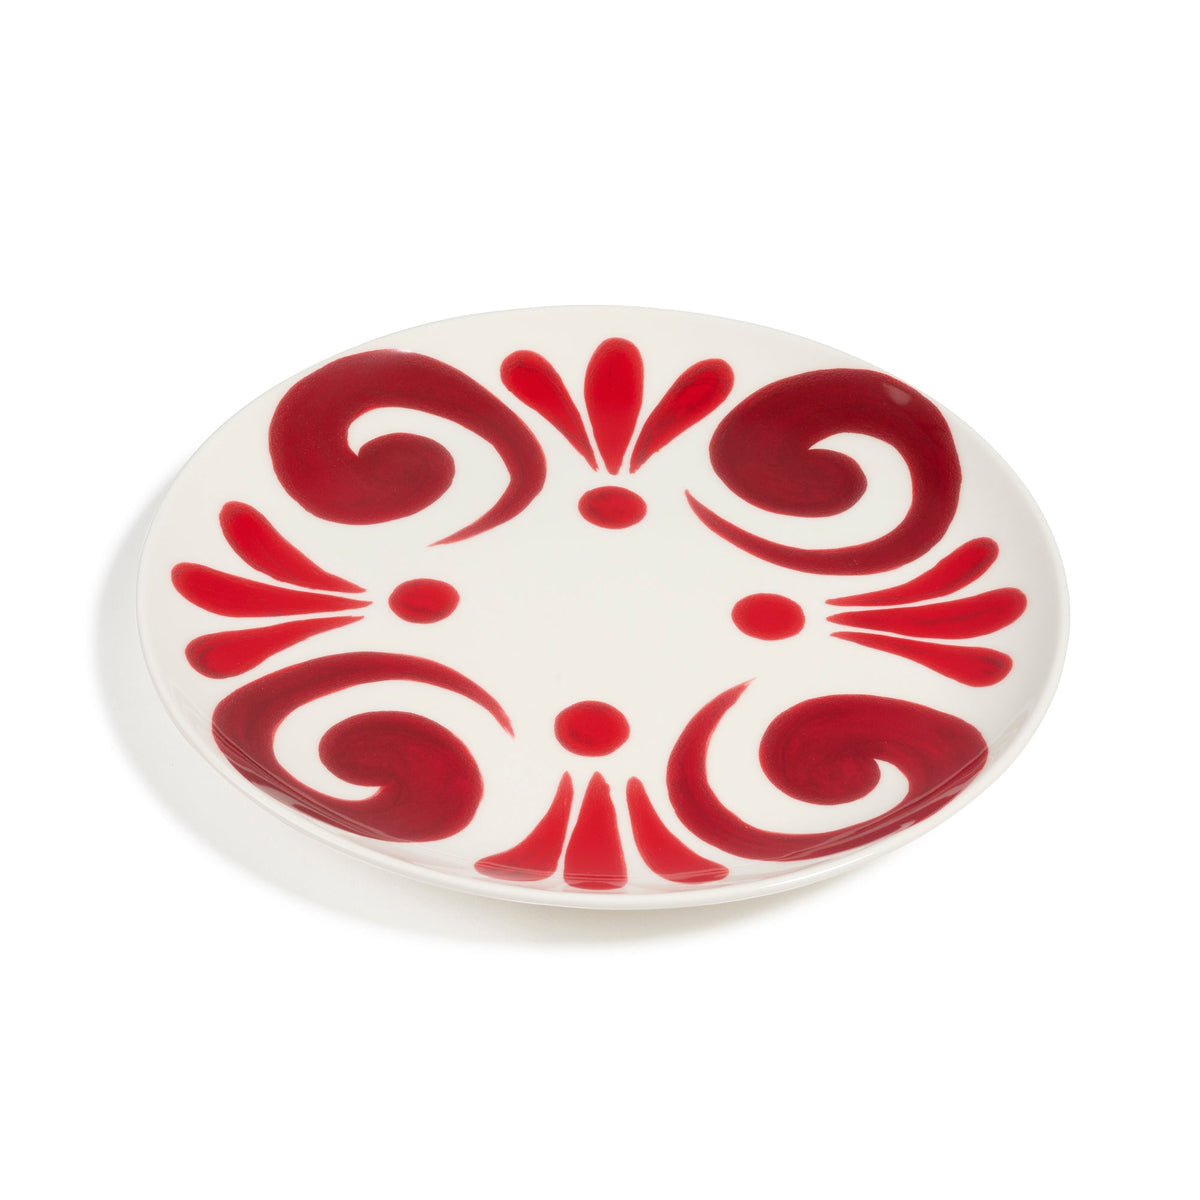 Kallos Charger Plate in Deep Red on White